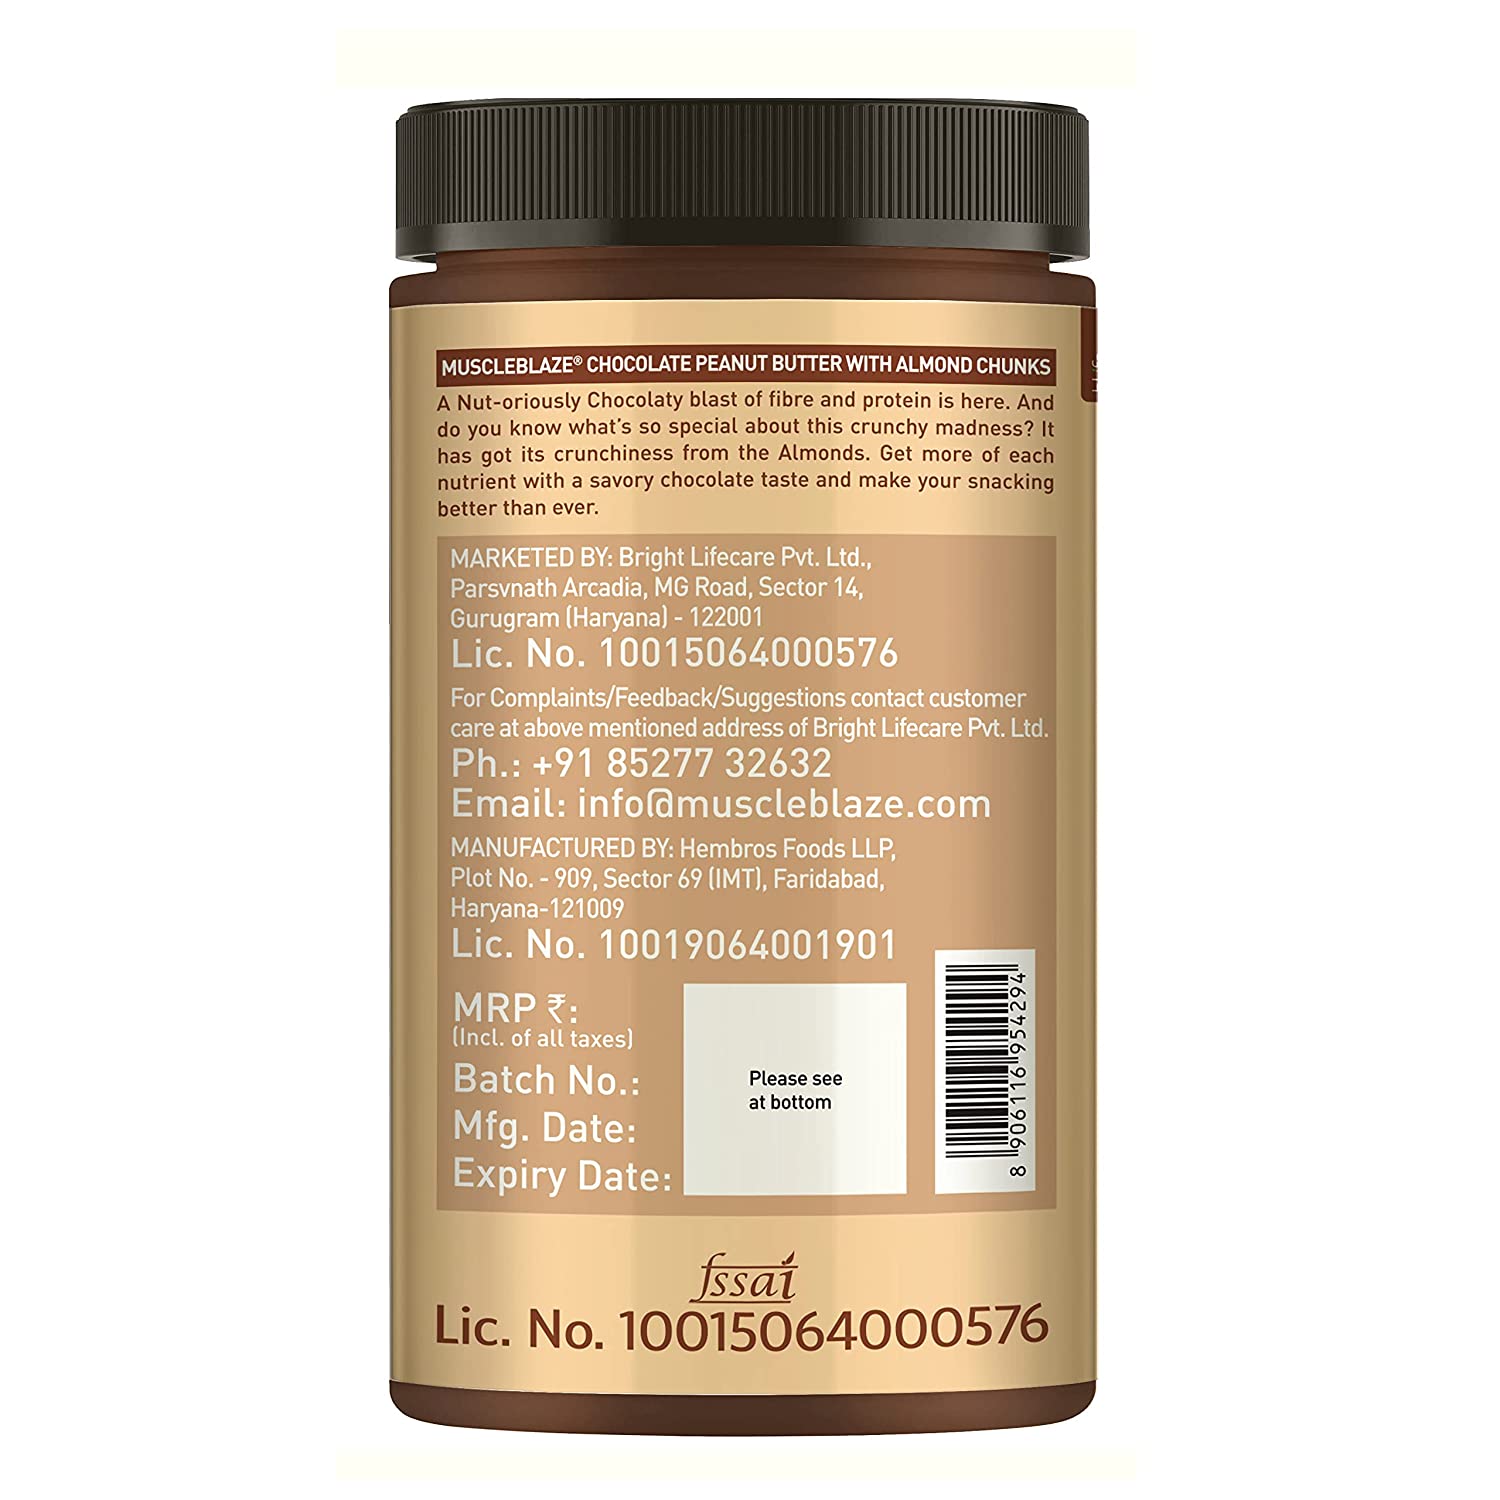 MuscleBlaze Chocolate Peanut Butter with Almond Chunks, 19% Protein, Chocolate Image